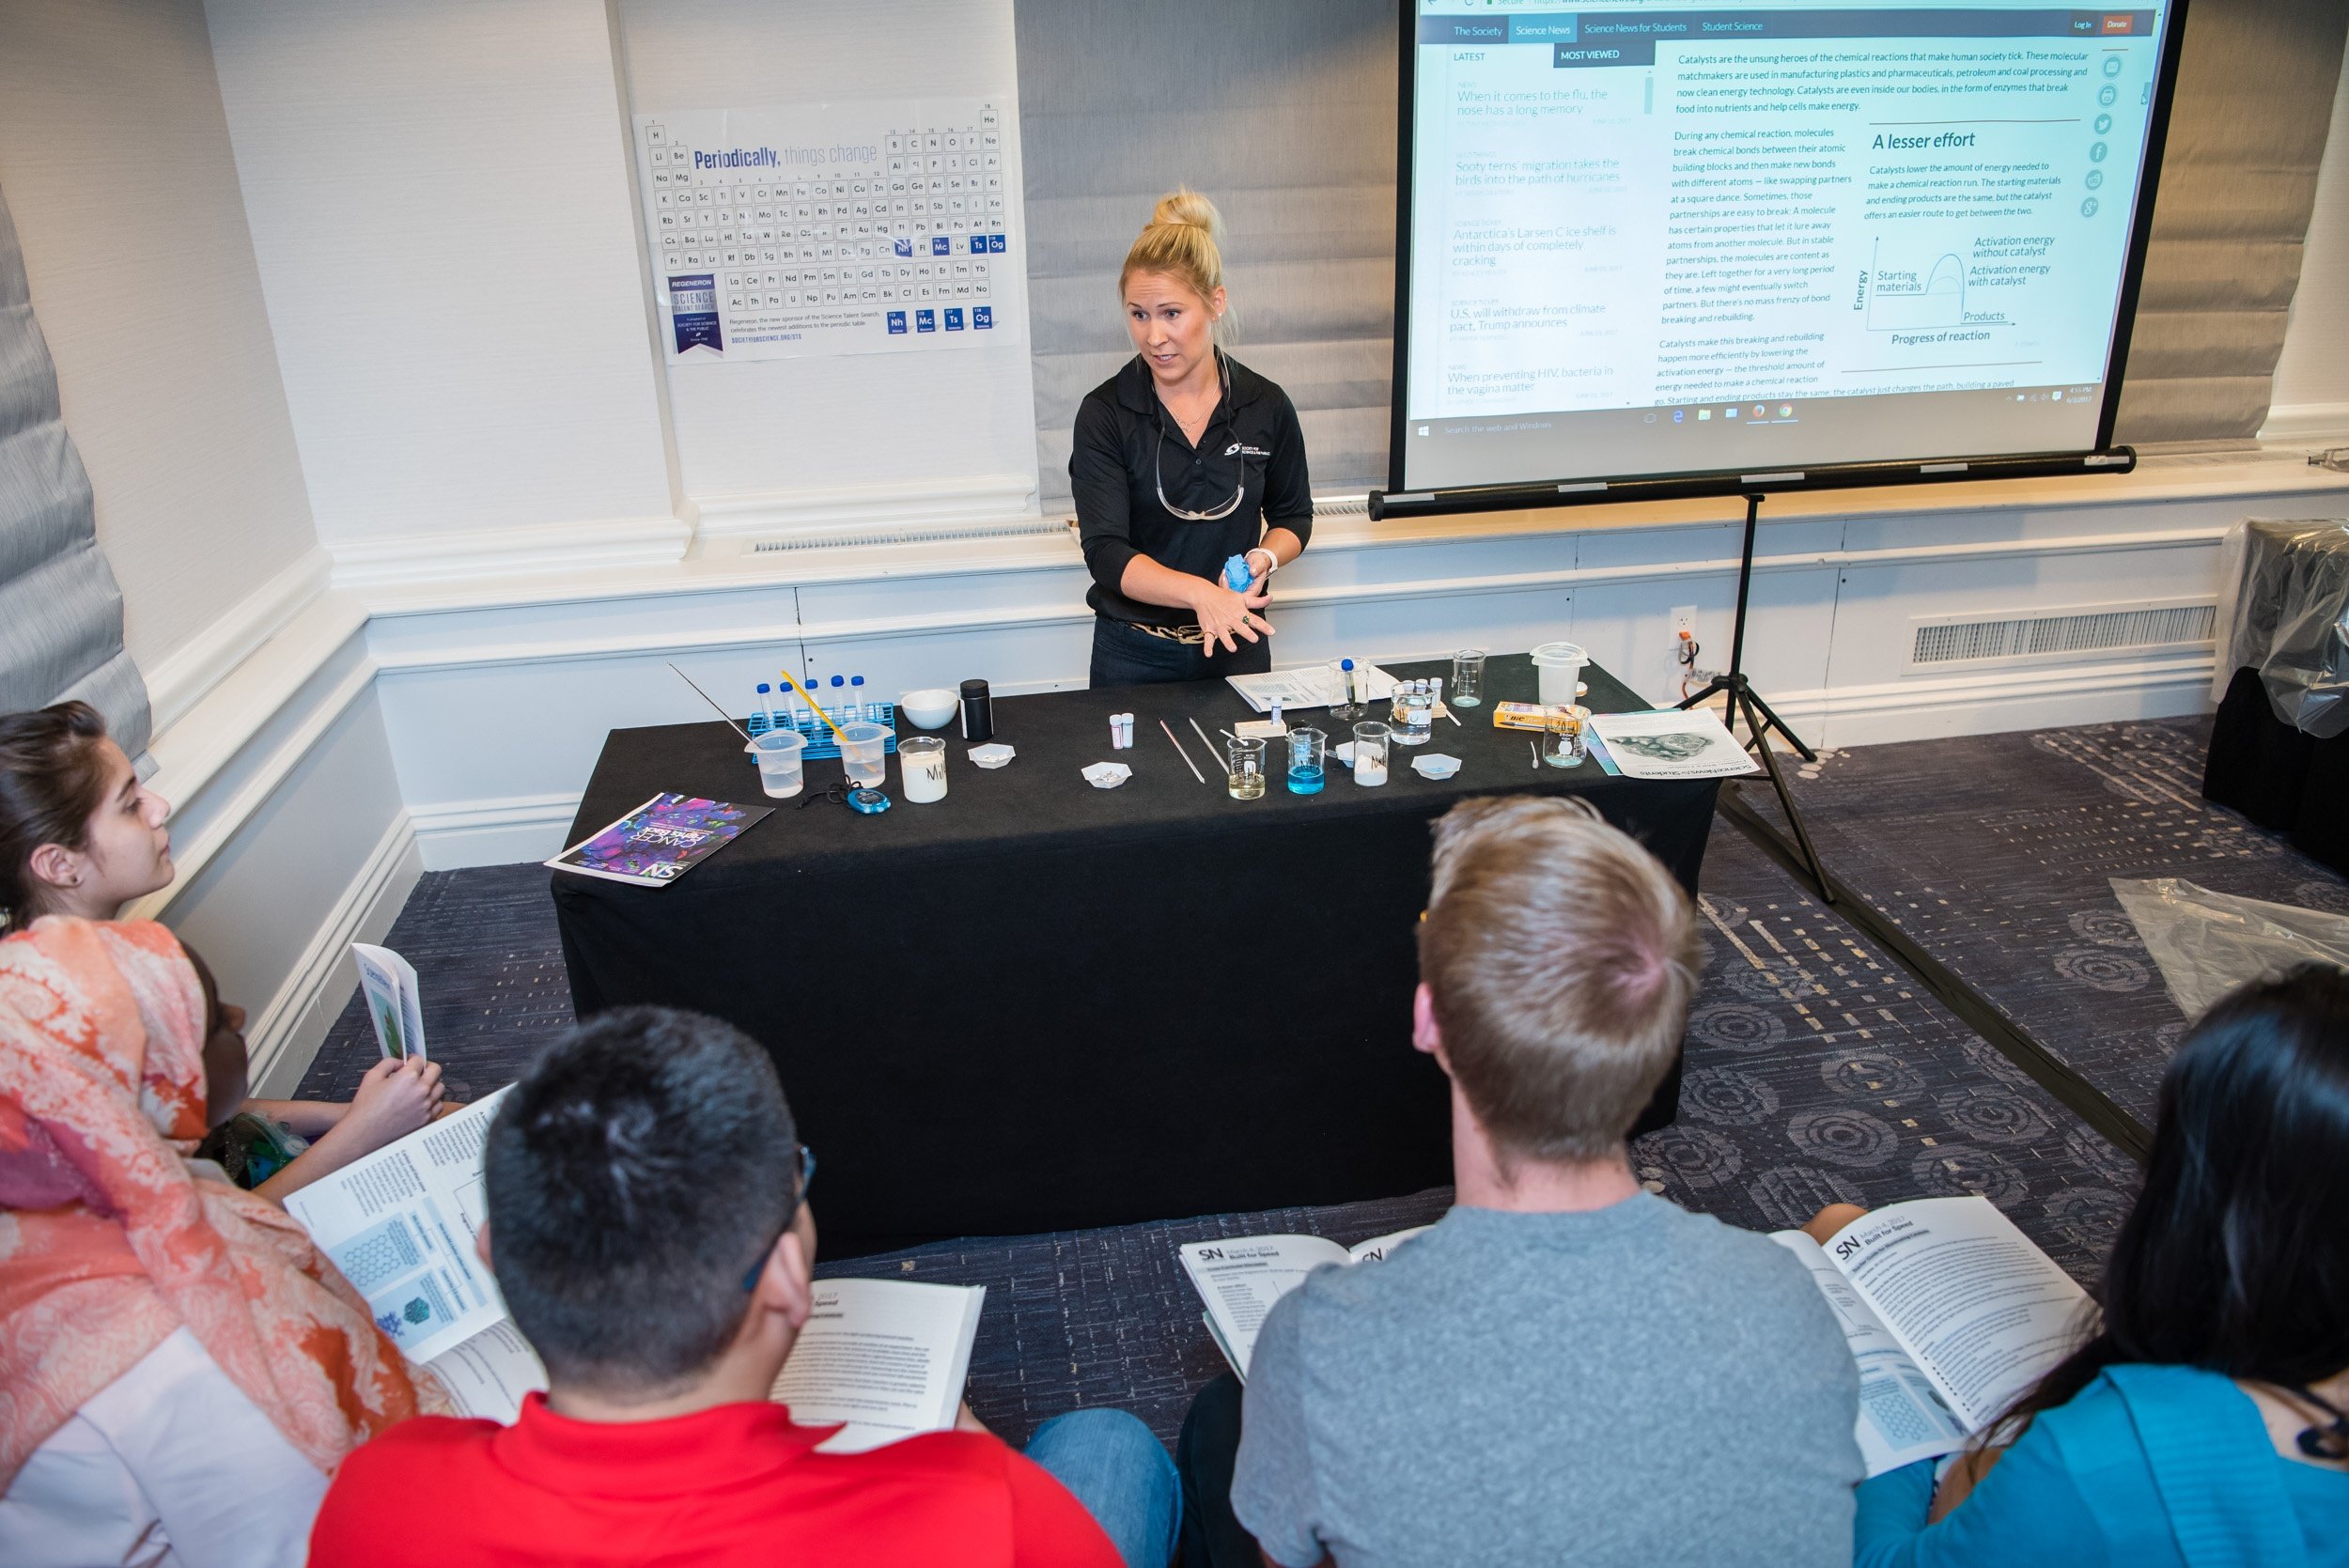 Society staff member Anna Rhymes prepares local students for a lab activity that the 2017 Advocates will test at the annual Advocate Training Institute. (Photo credit: Society for Science & the Public)